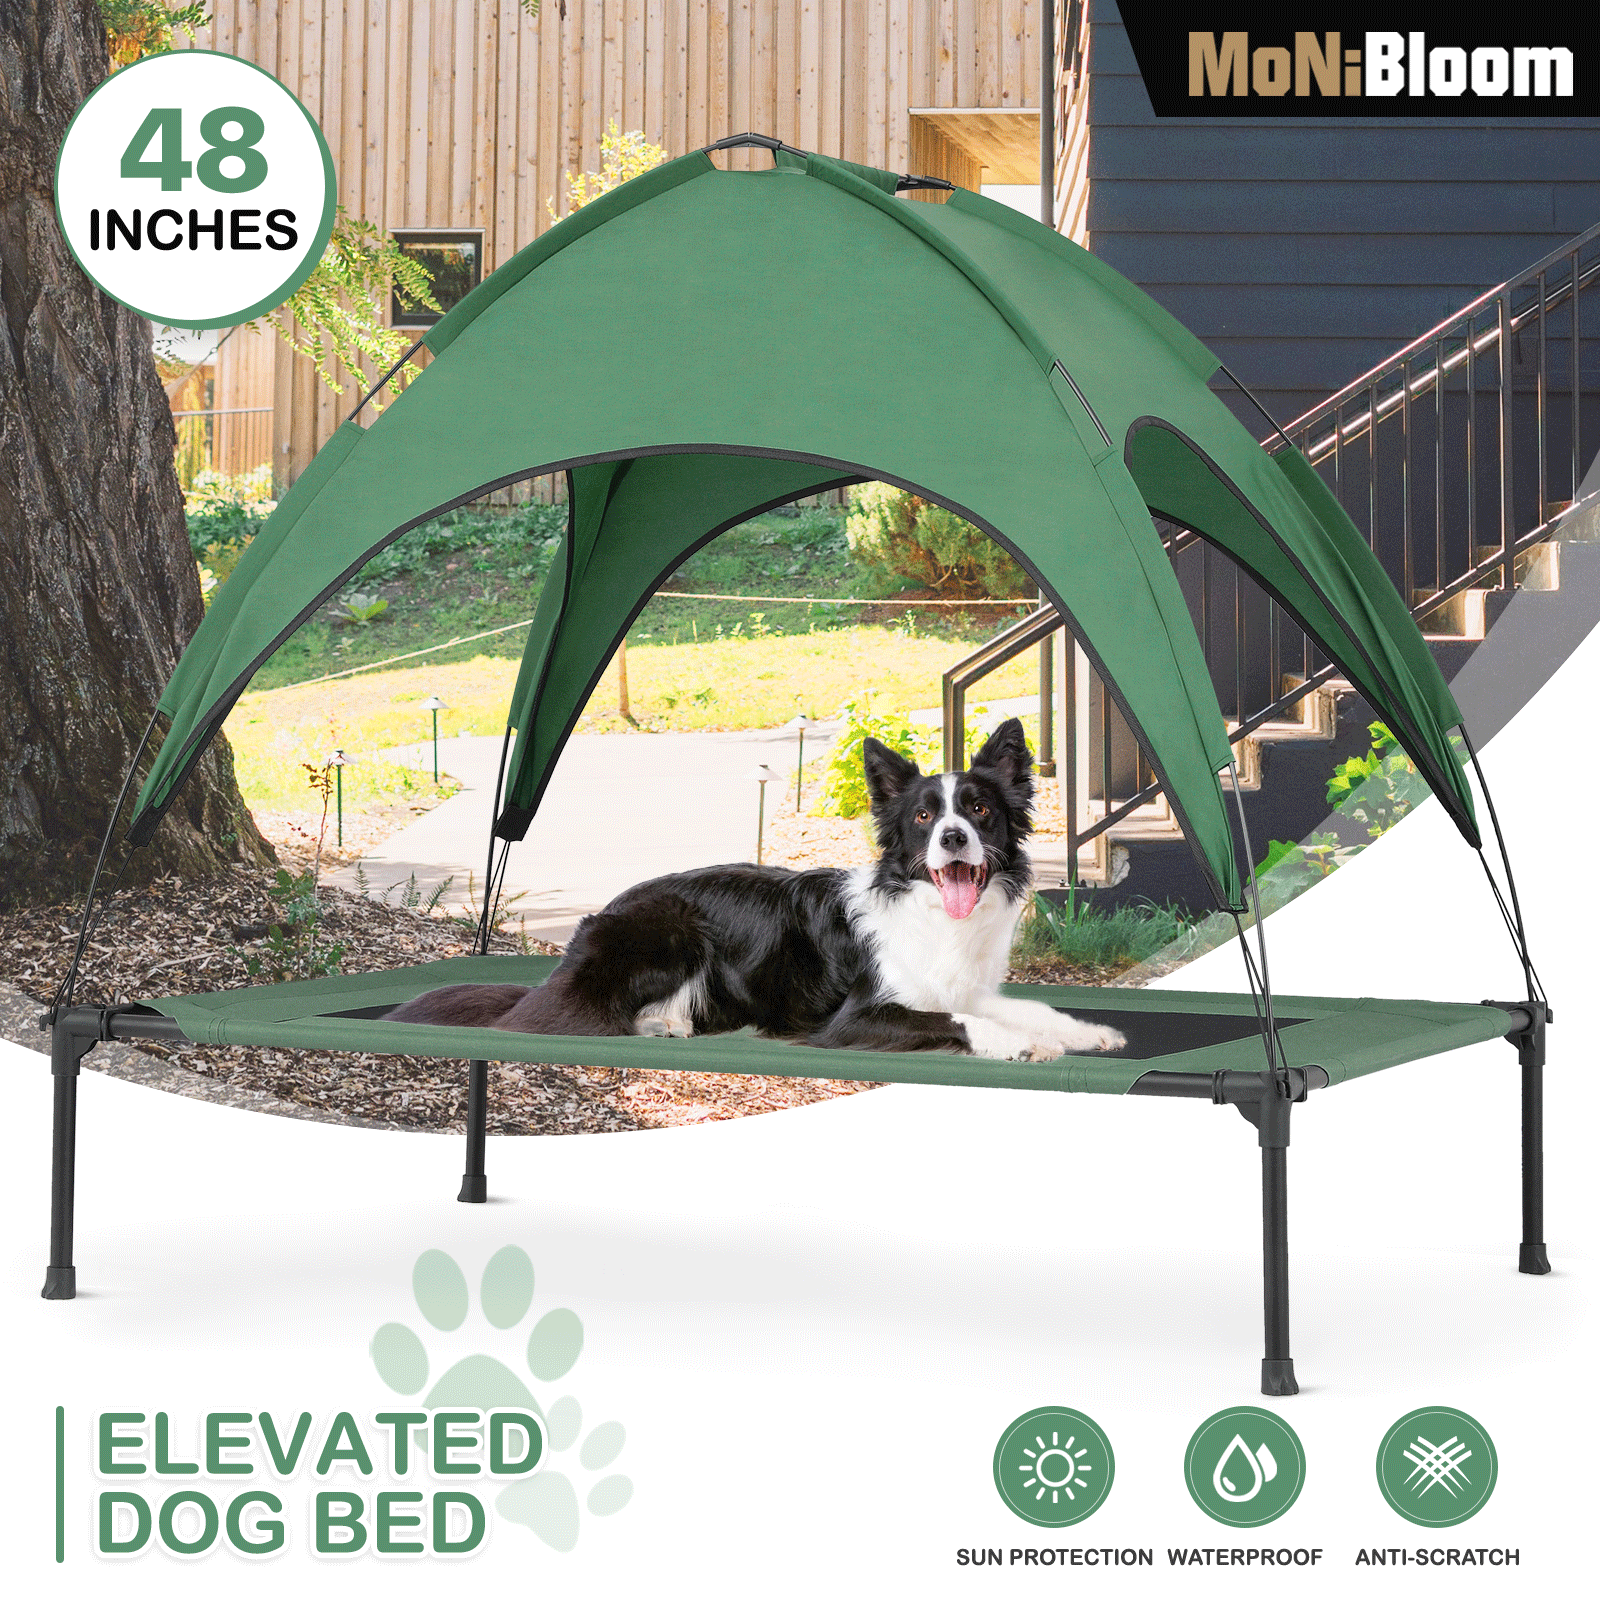 

Elevated Dog Bed With Removable Canopy, 2-in-1 Indoor/outdoor Oxford Dog Cot With Canopy Shade For Dog And Cat, Cooling Dog Bed With Tent For Camping Or Beach, 48 Inch Length For Medium Large Dogs